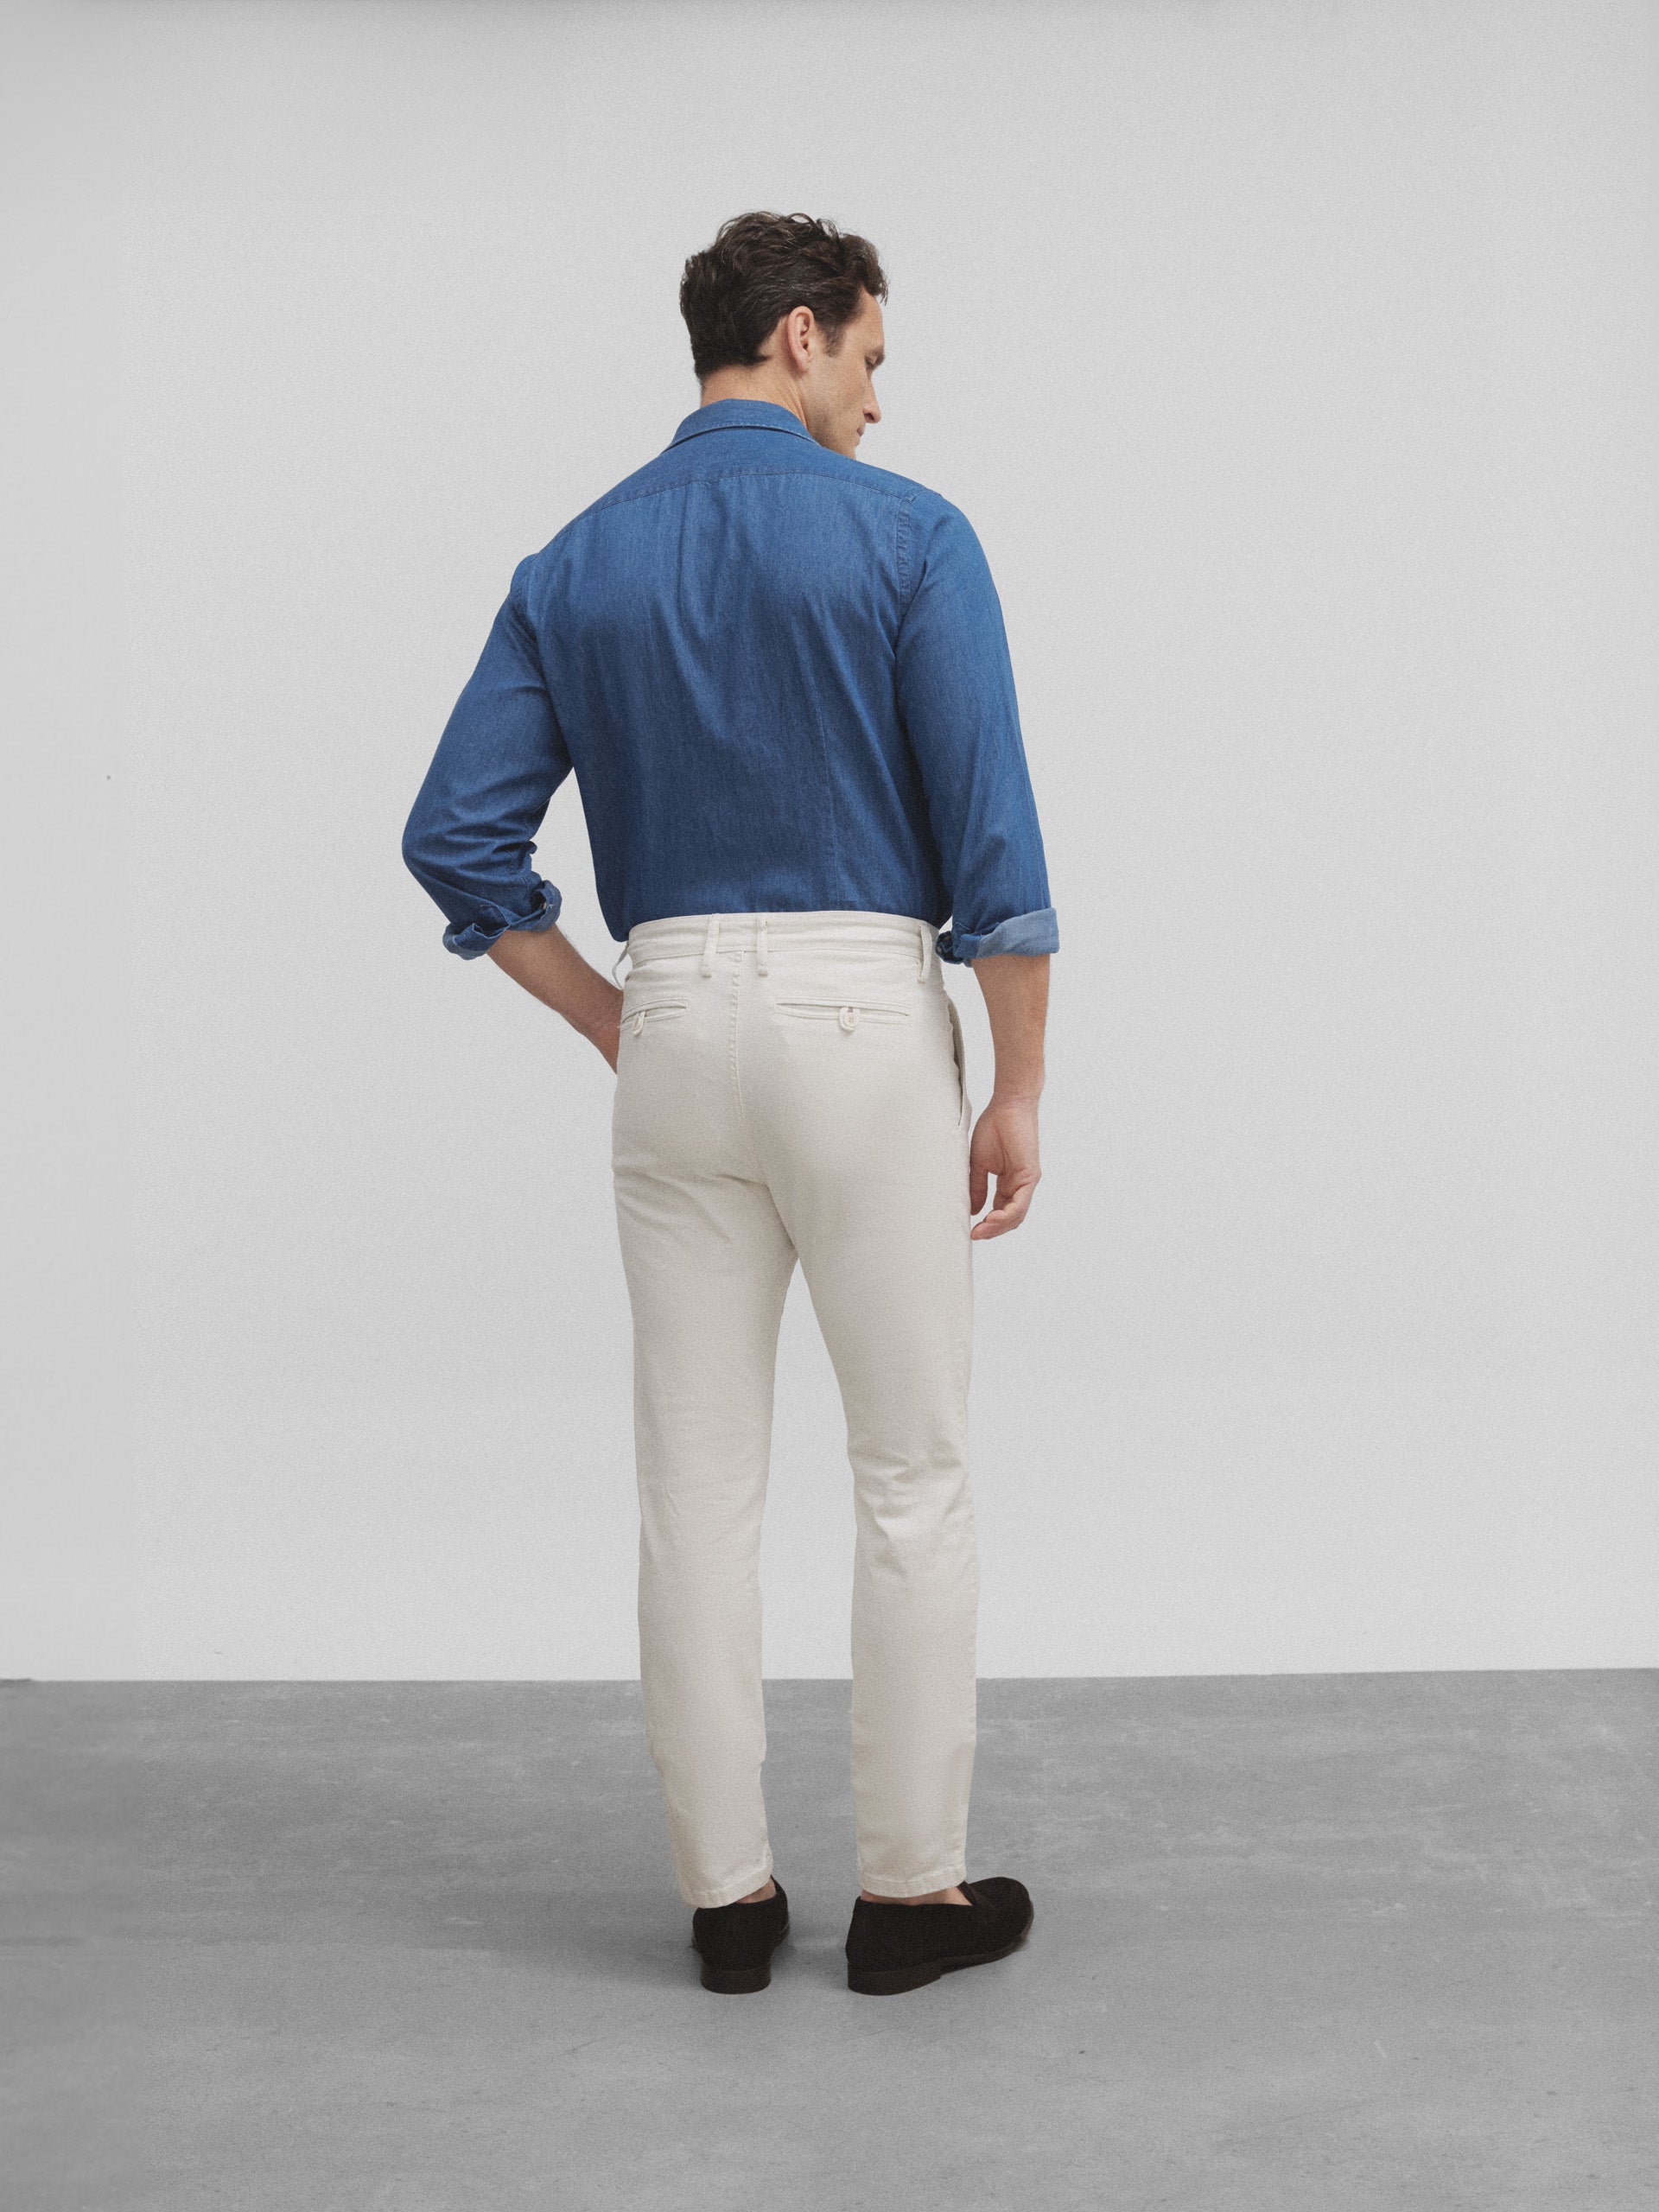 Light beige extended chino sport pants